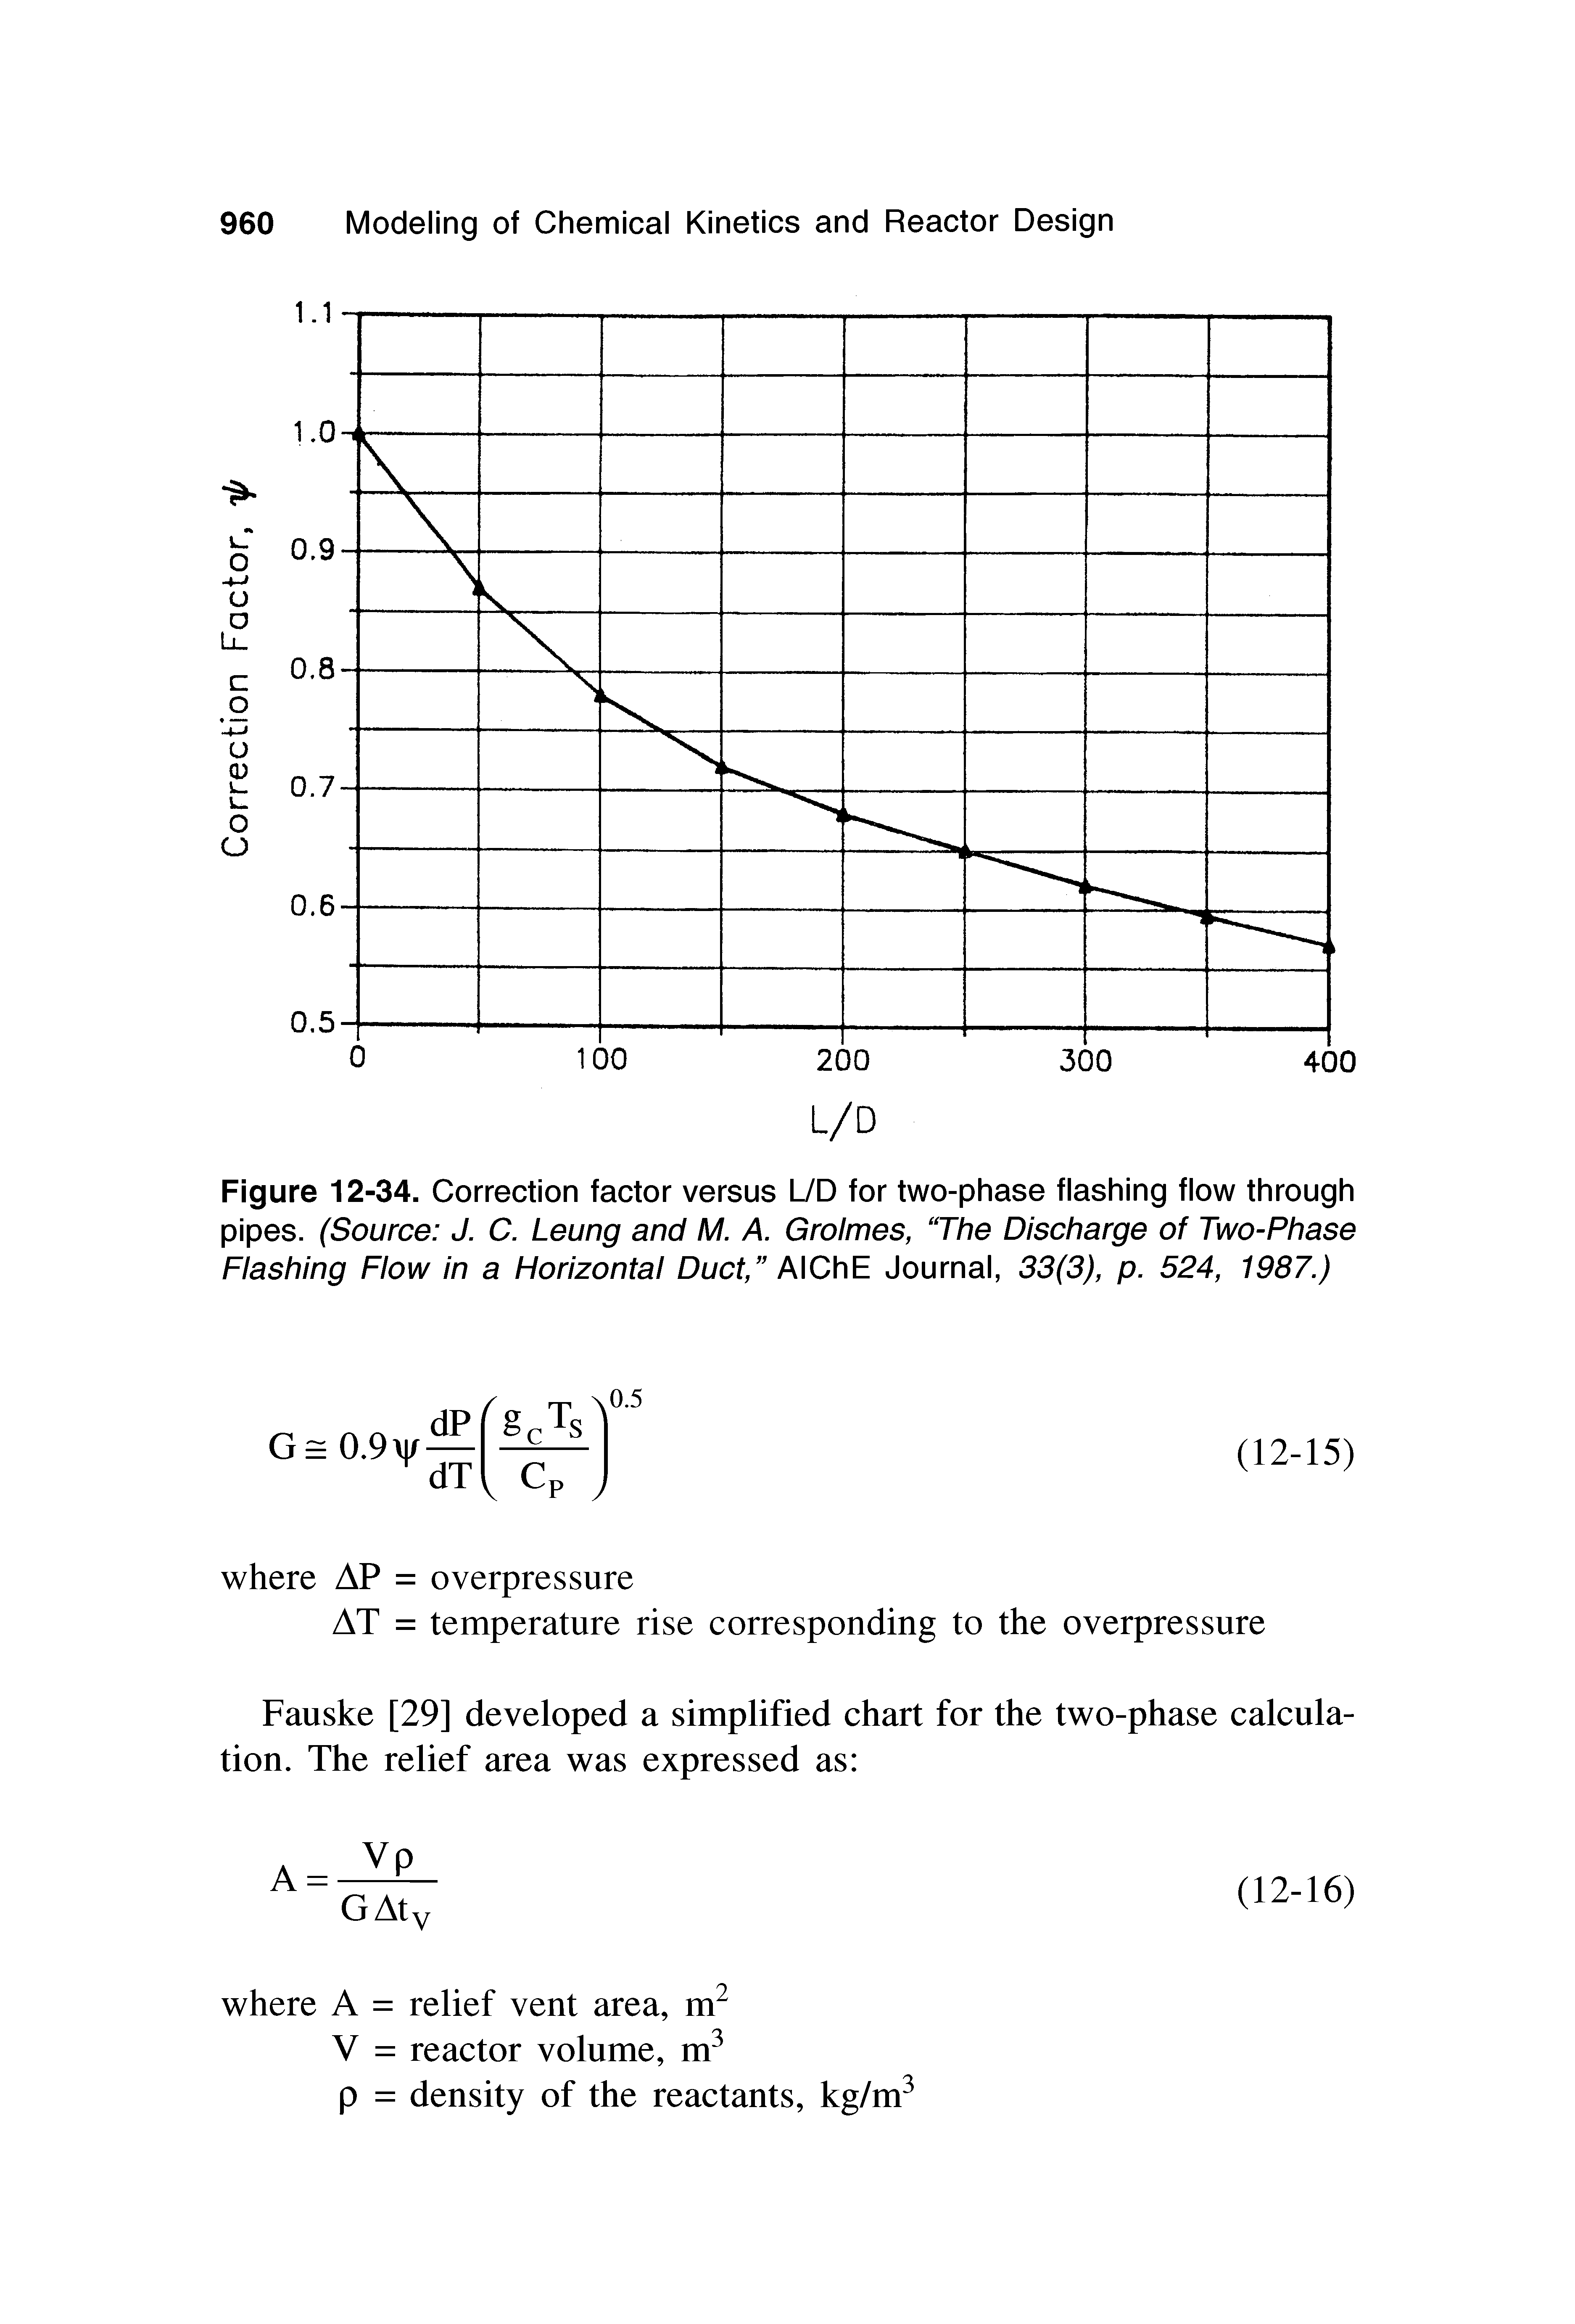 Figure 12-34. Correction factor versus L/D for two-phase flashing flow through pipes. (Source J. C. Leung and M. A. Grolmes, The Discharge of Two-Phase Flashing Flow in a Horizontal Duct, AlChE Journal, 33(3), p. 524, 1987.)...